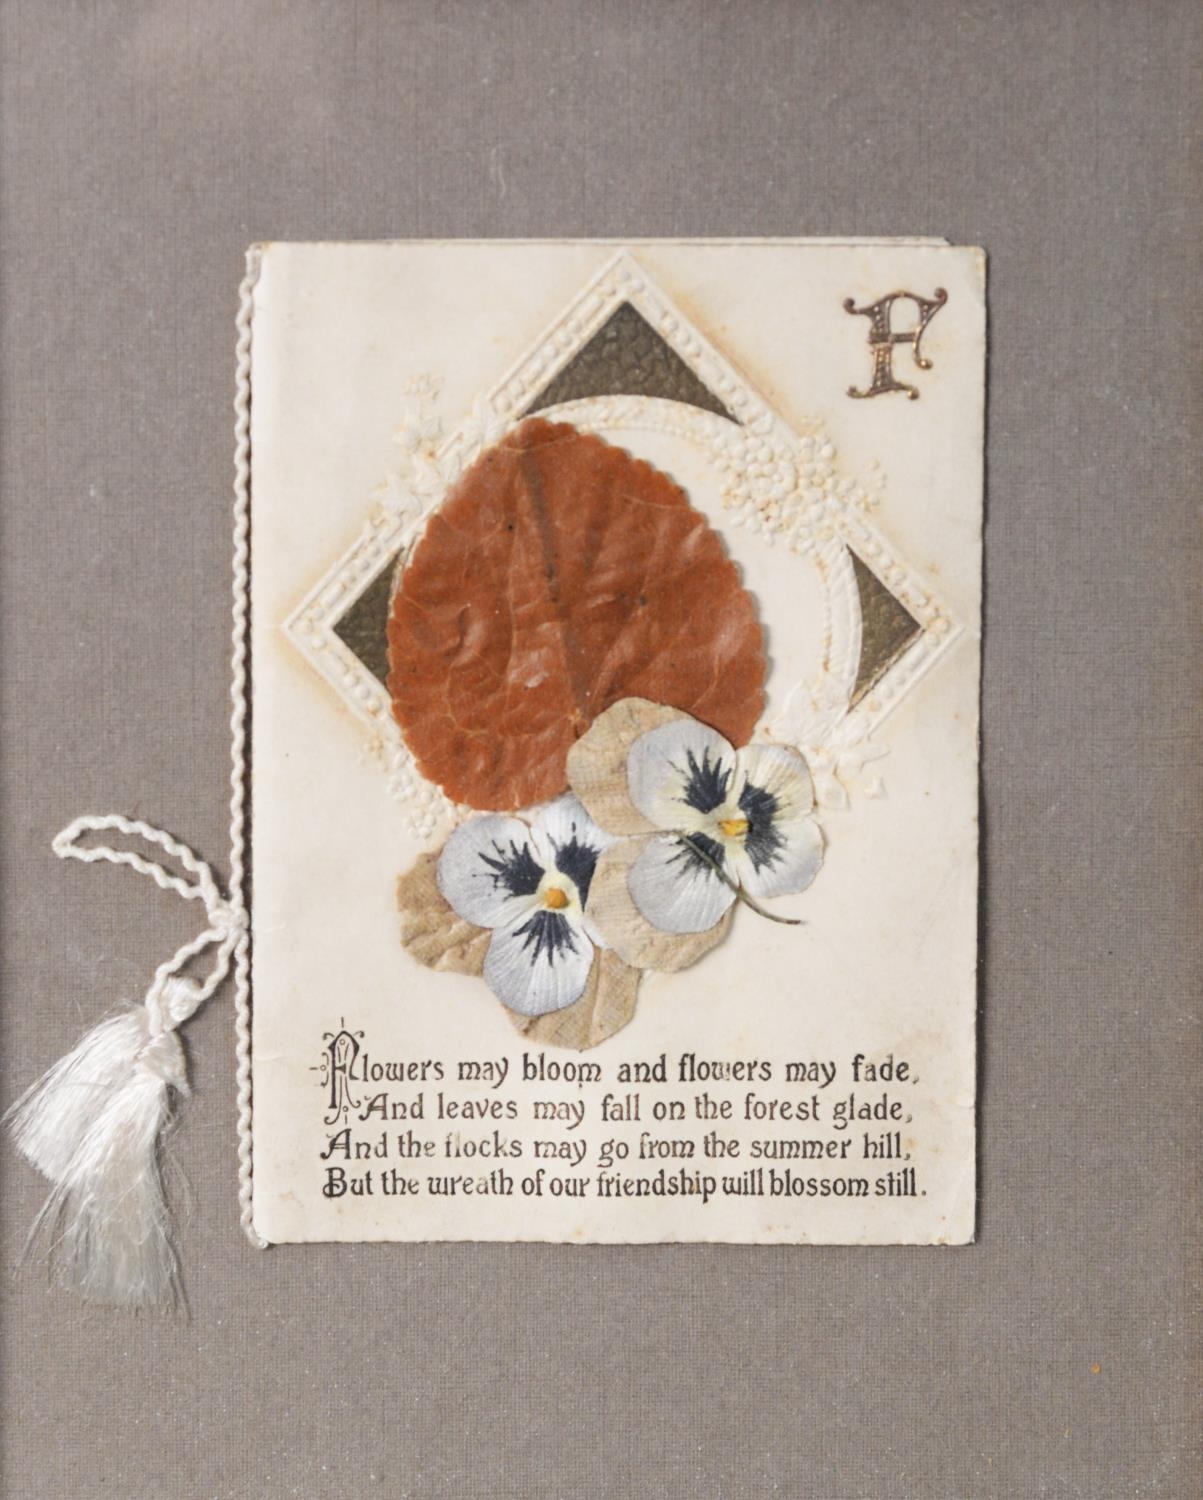 SEVEN EARLY 20th CENTURY VALENTINE AND OTHER SENTIMENTAL CARDS, with hand-painted or embroidered - Image 6 of 10